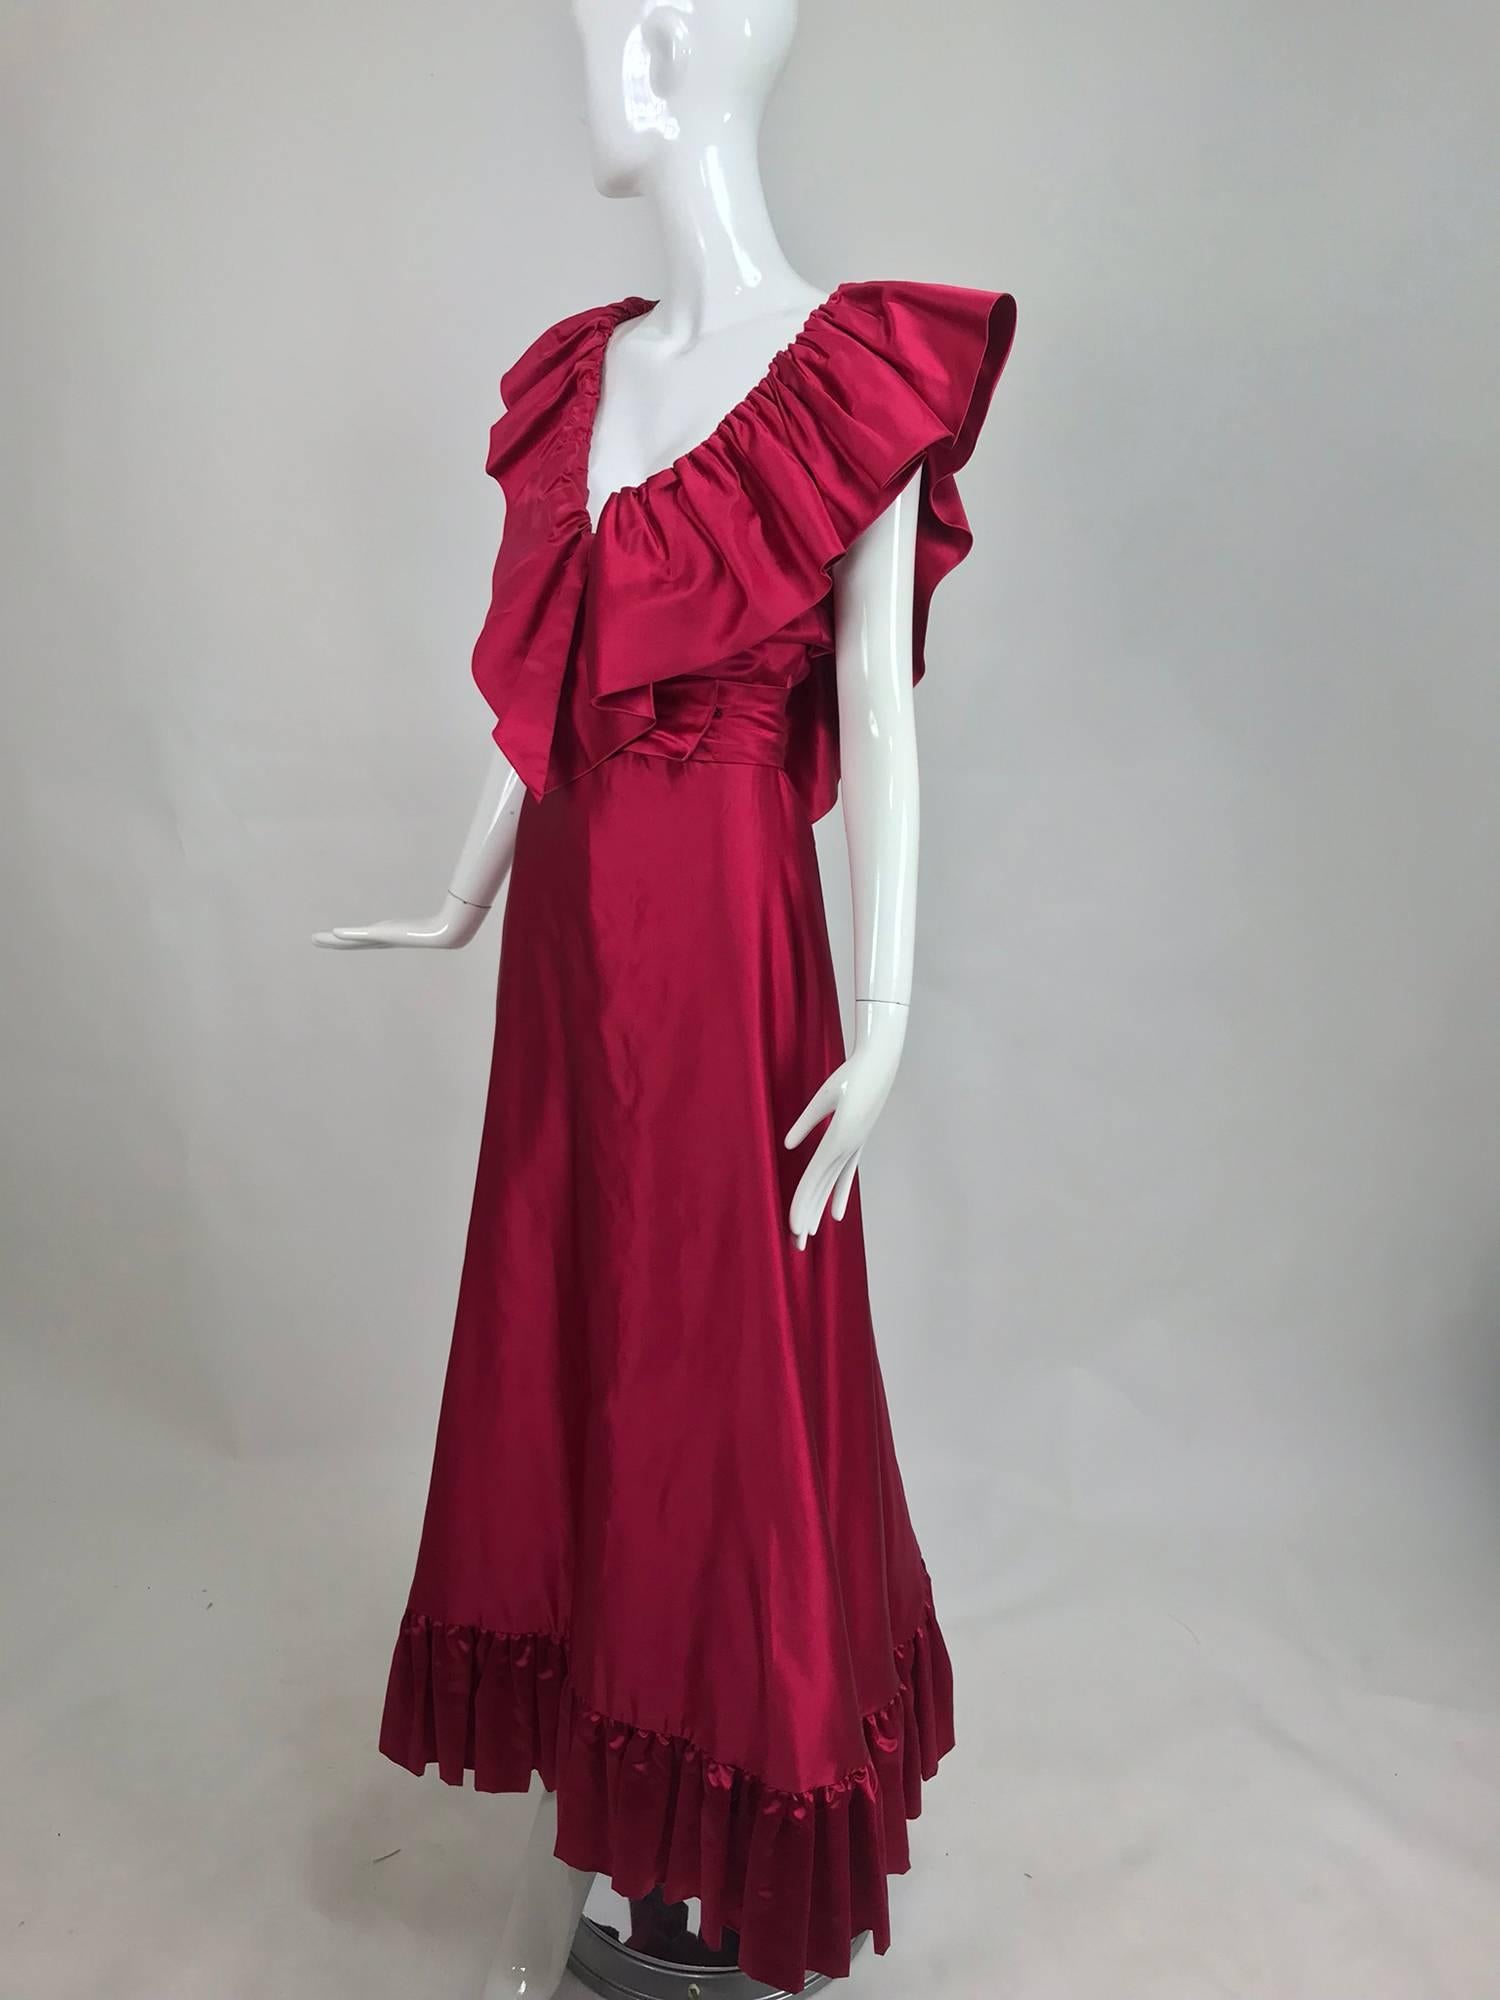 Vintage Stavropoulos plunge bodice garnet slipper satin evening gown from the 1970s. This romantic gown is made from the most incredible silk fabric, in a rich lustrous colour. The deep ruffled bodice plunges at the front and back, the ruffles sit